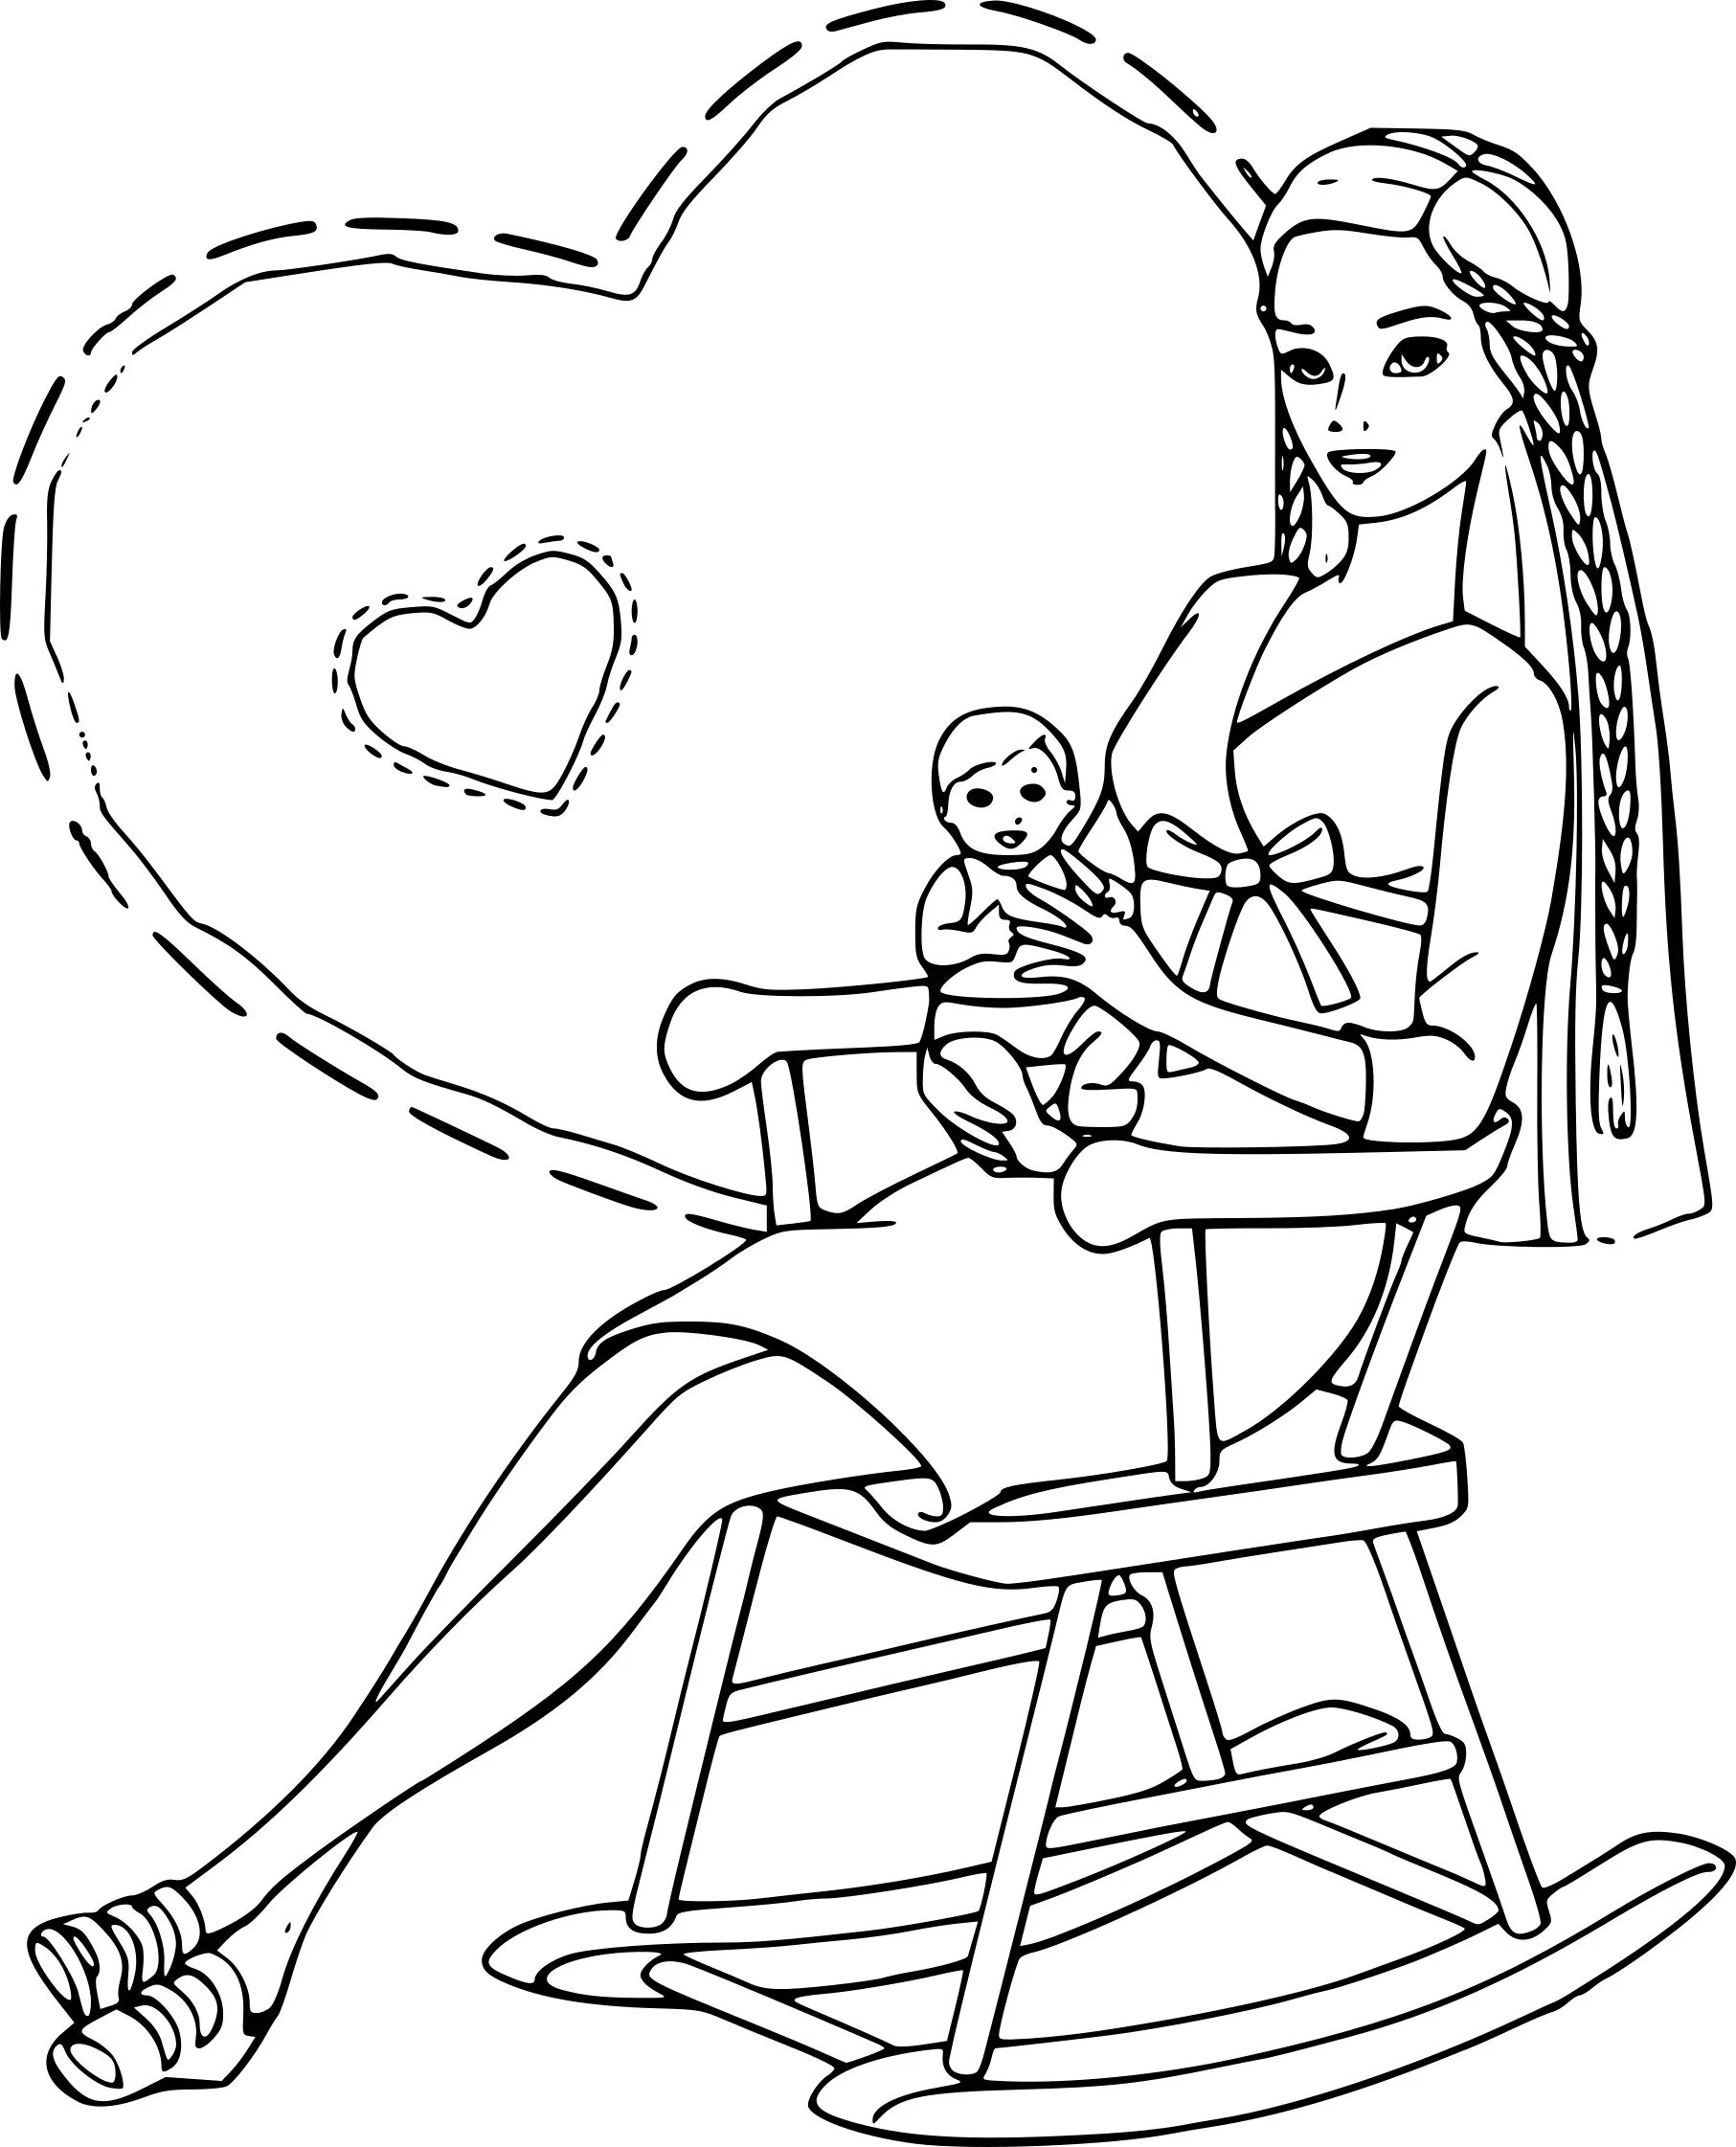 Coloring page glamor pregnant doll